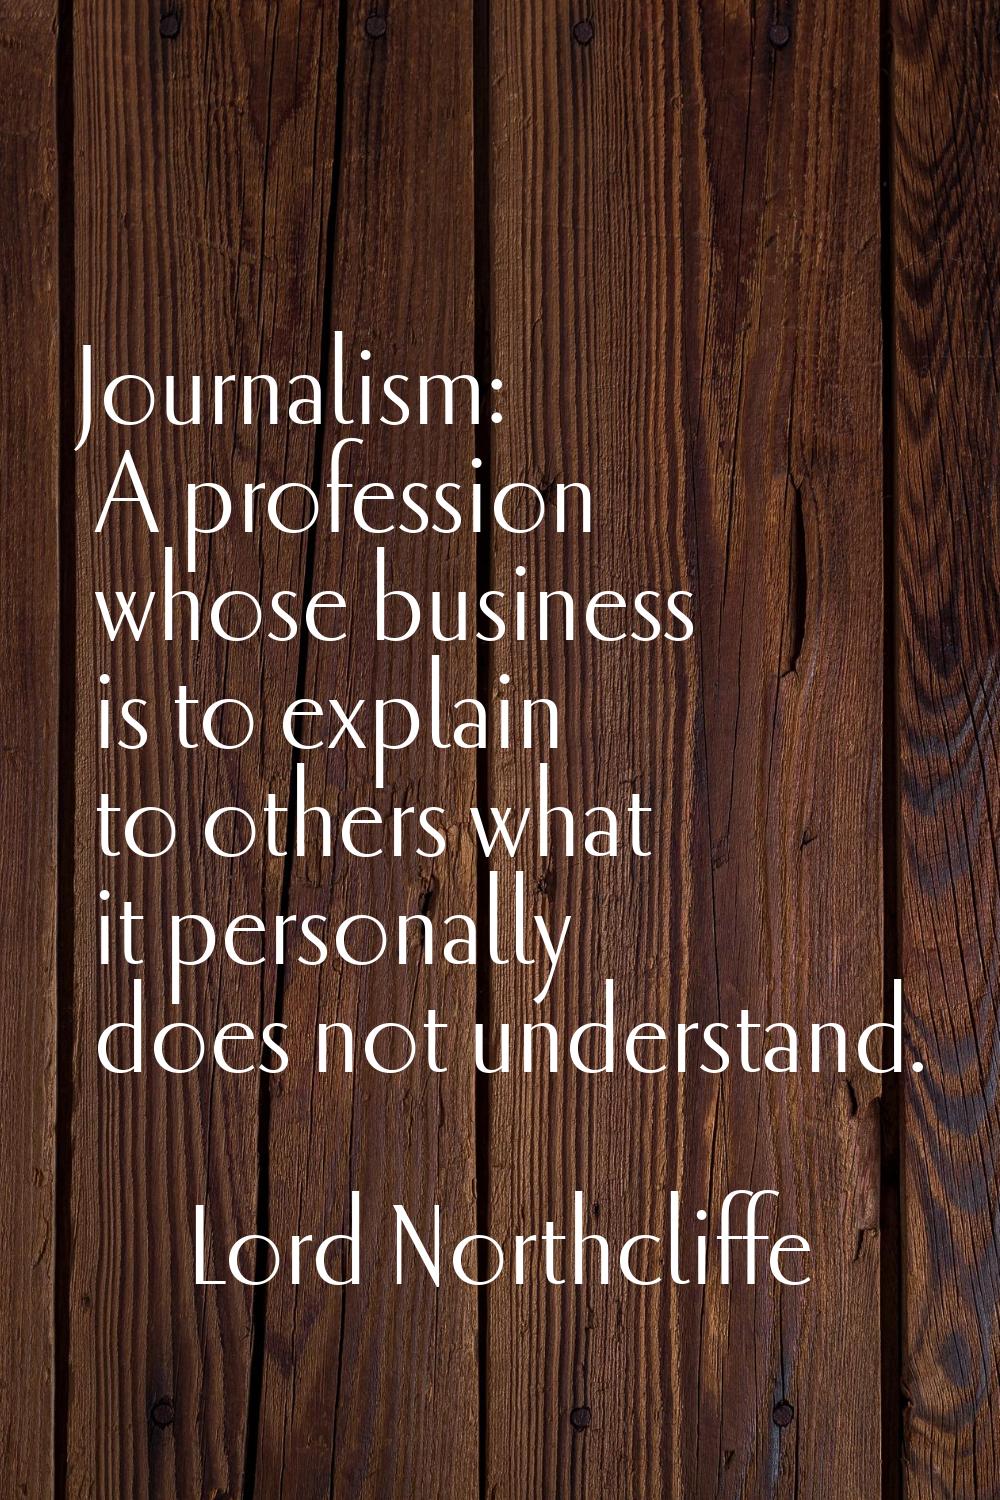 Journalism: A profession whose business is to explain to others what it personally does not underst